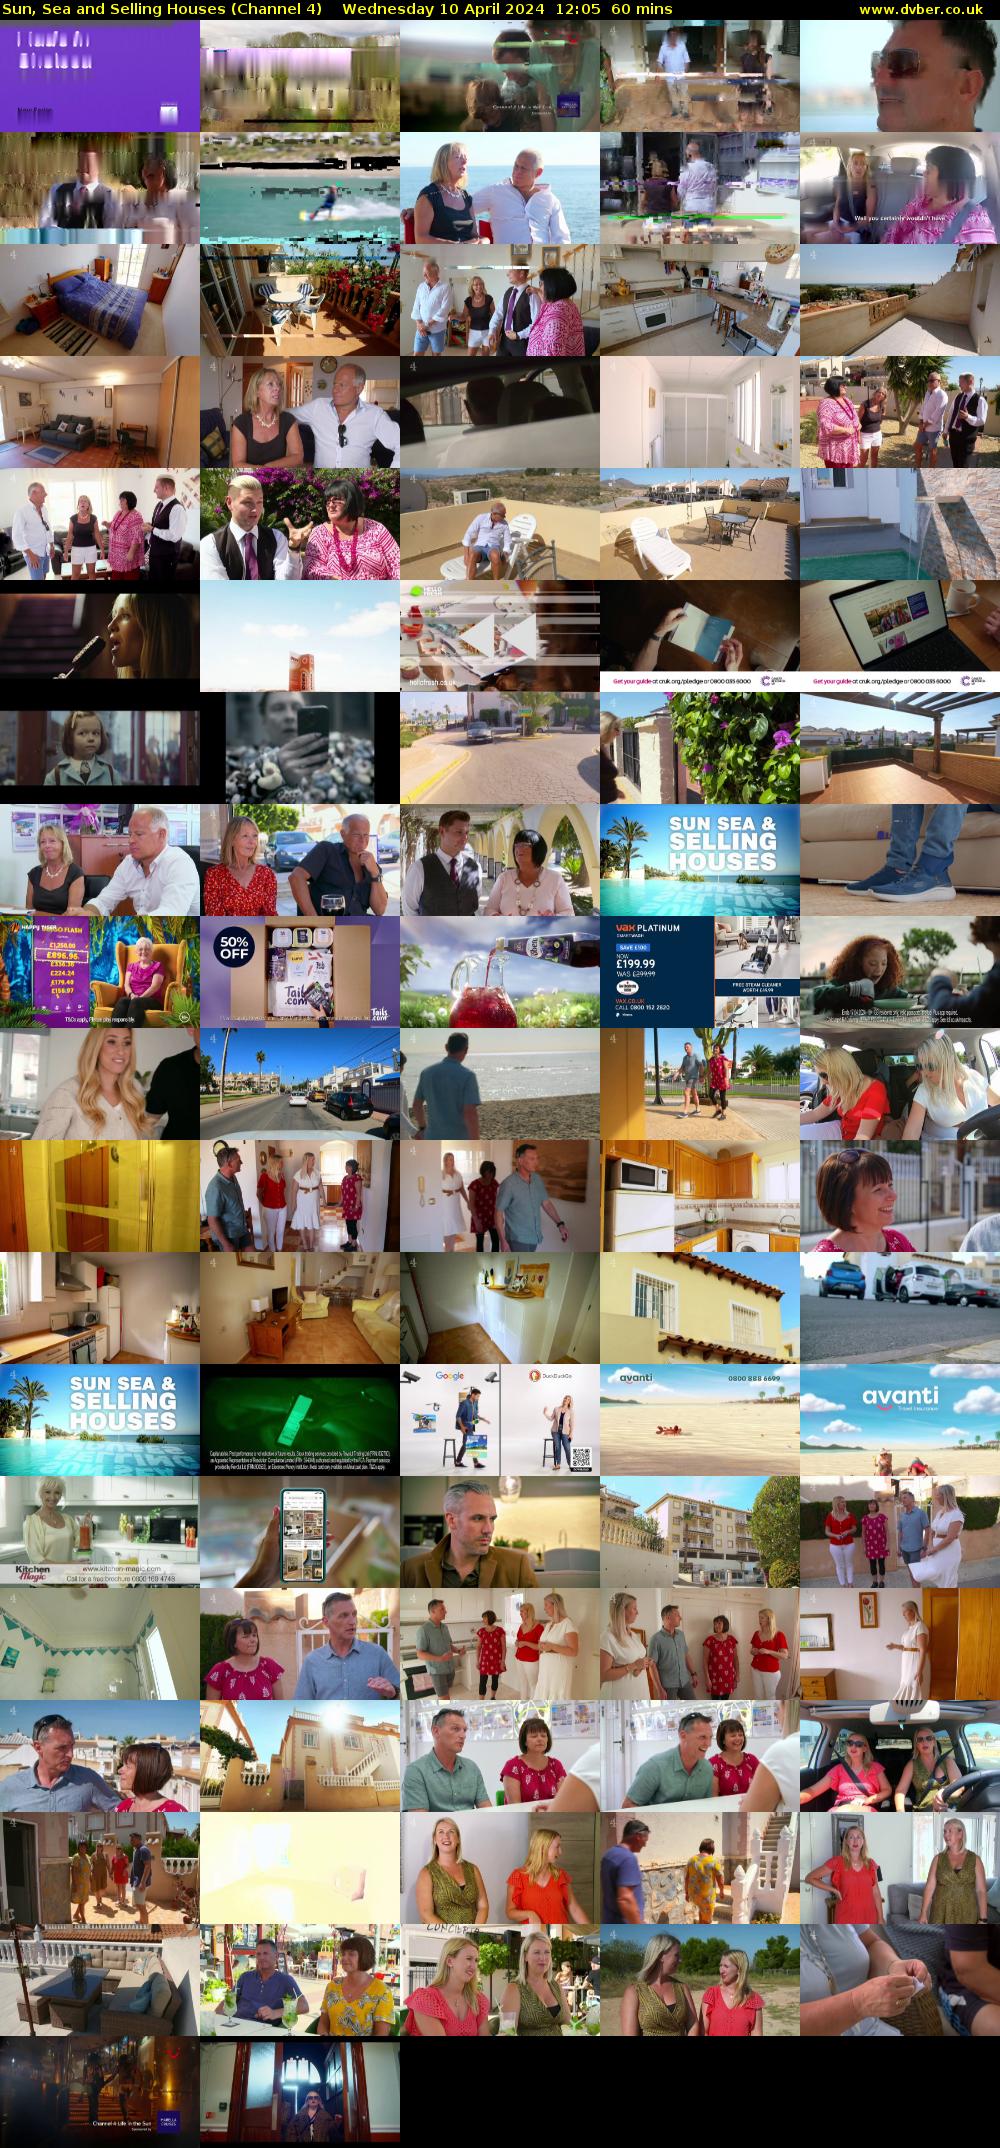 Sun, Sea and Selling Houses (Channel 4) Wednesday 10 April 2024 12:05 - 13:05